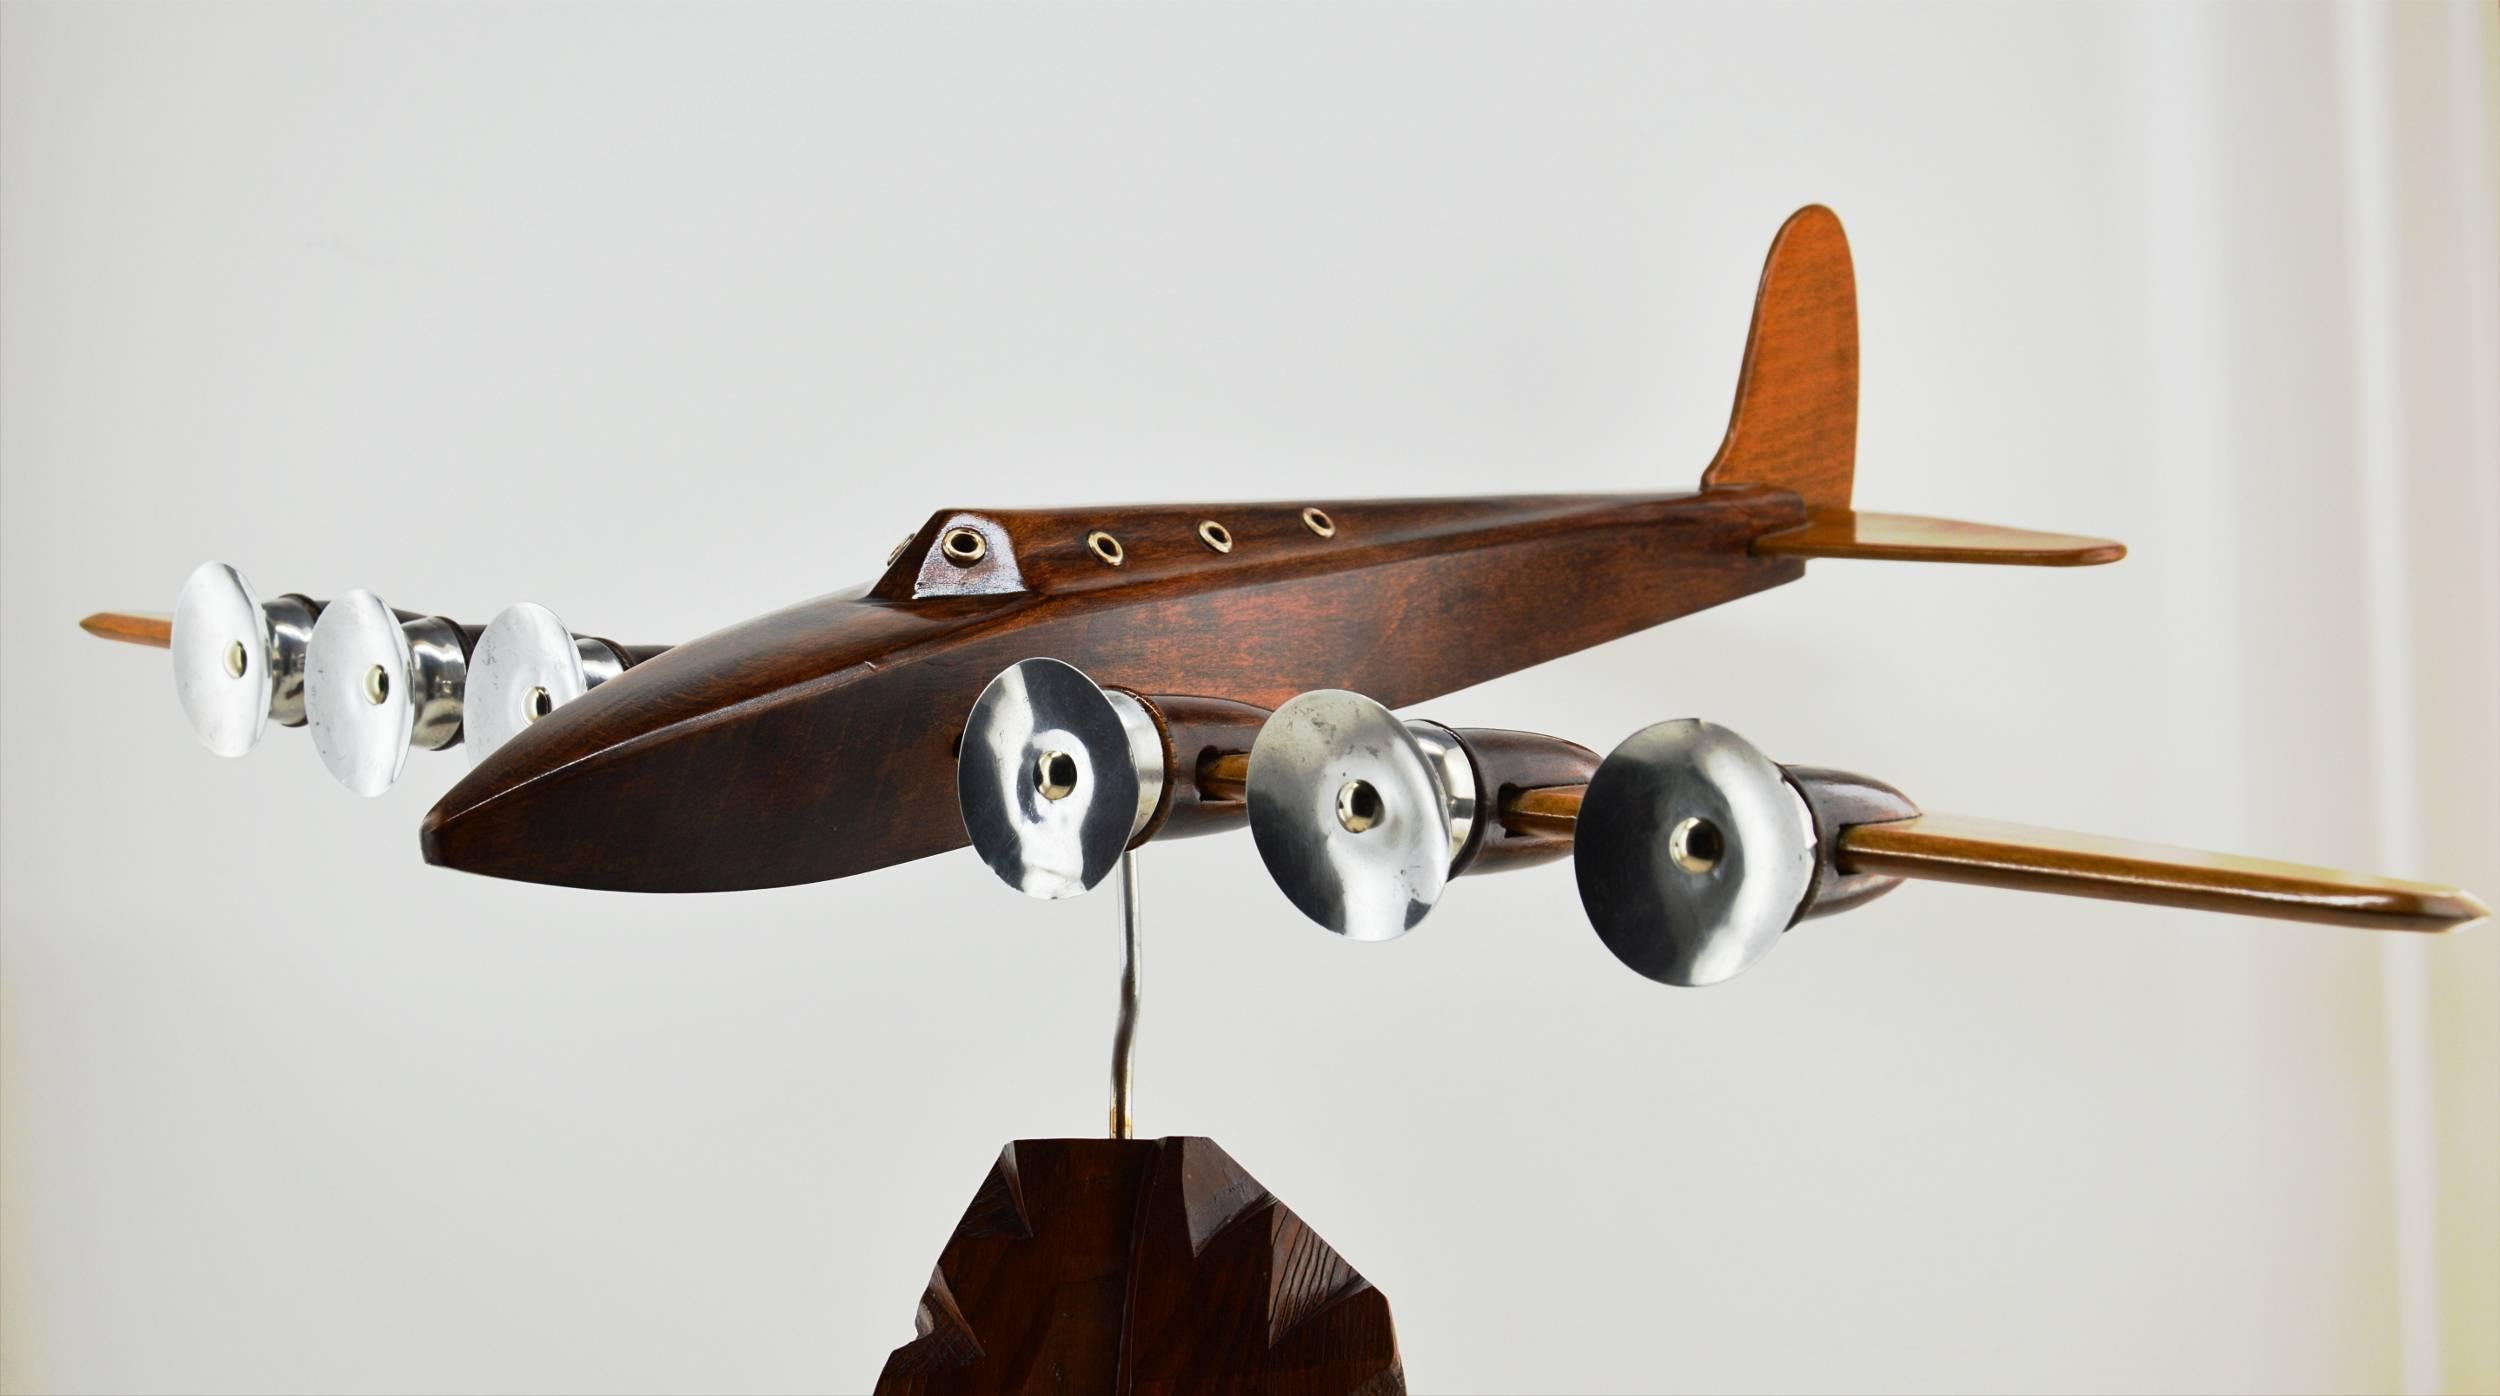 Large French Art Deco airplane model by Anthoine Art Bois, 1930s. Large wooden and metal swiveling airplane. Wingspan: 26"(66cm), length: 19.7"(50cm), height: 16.5"(42cm).